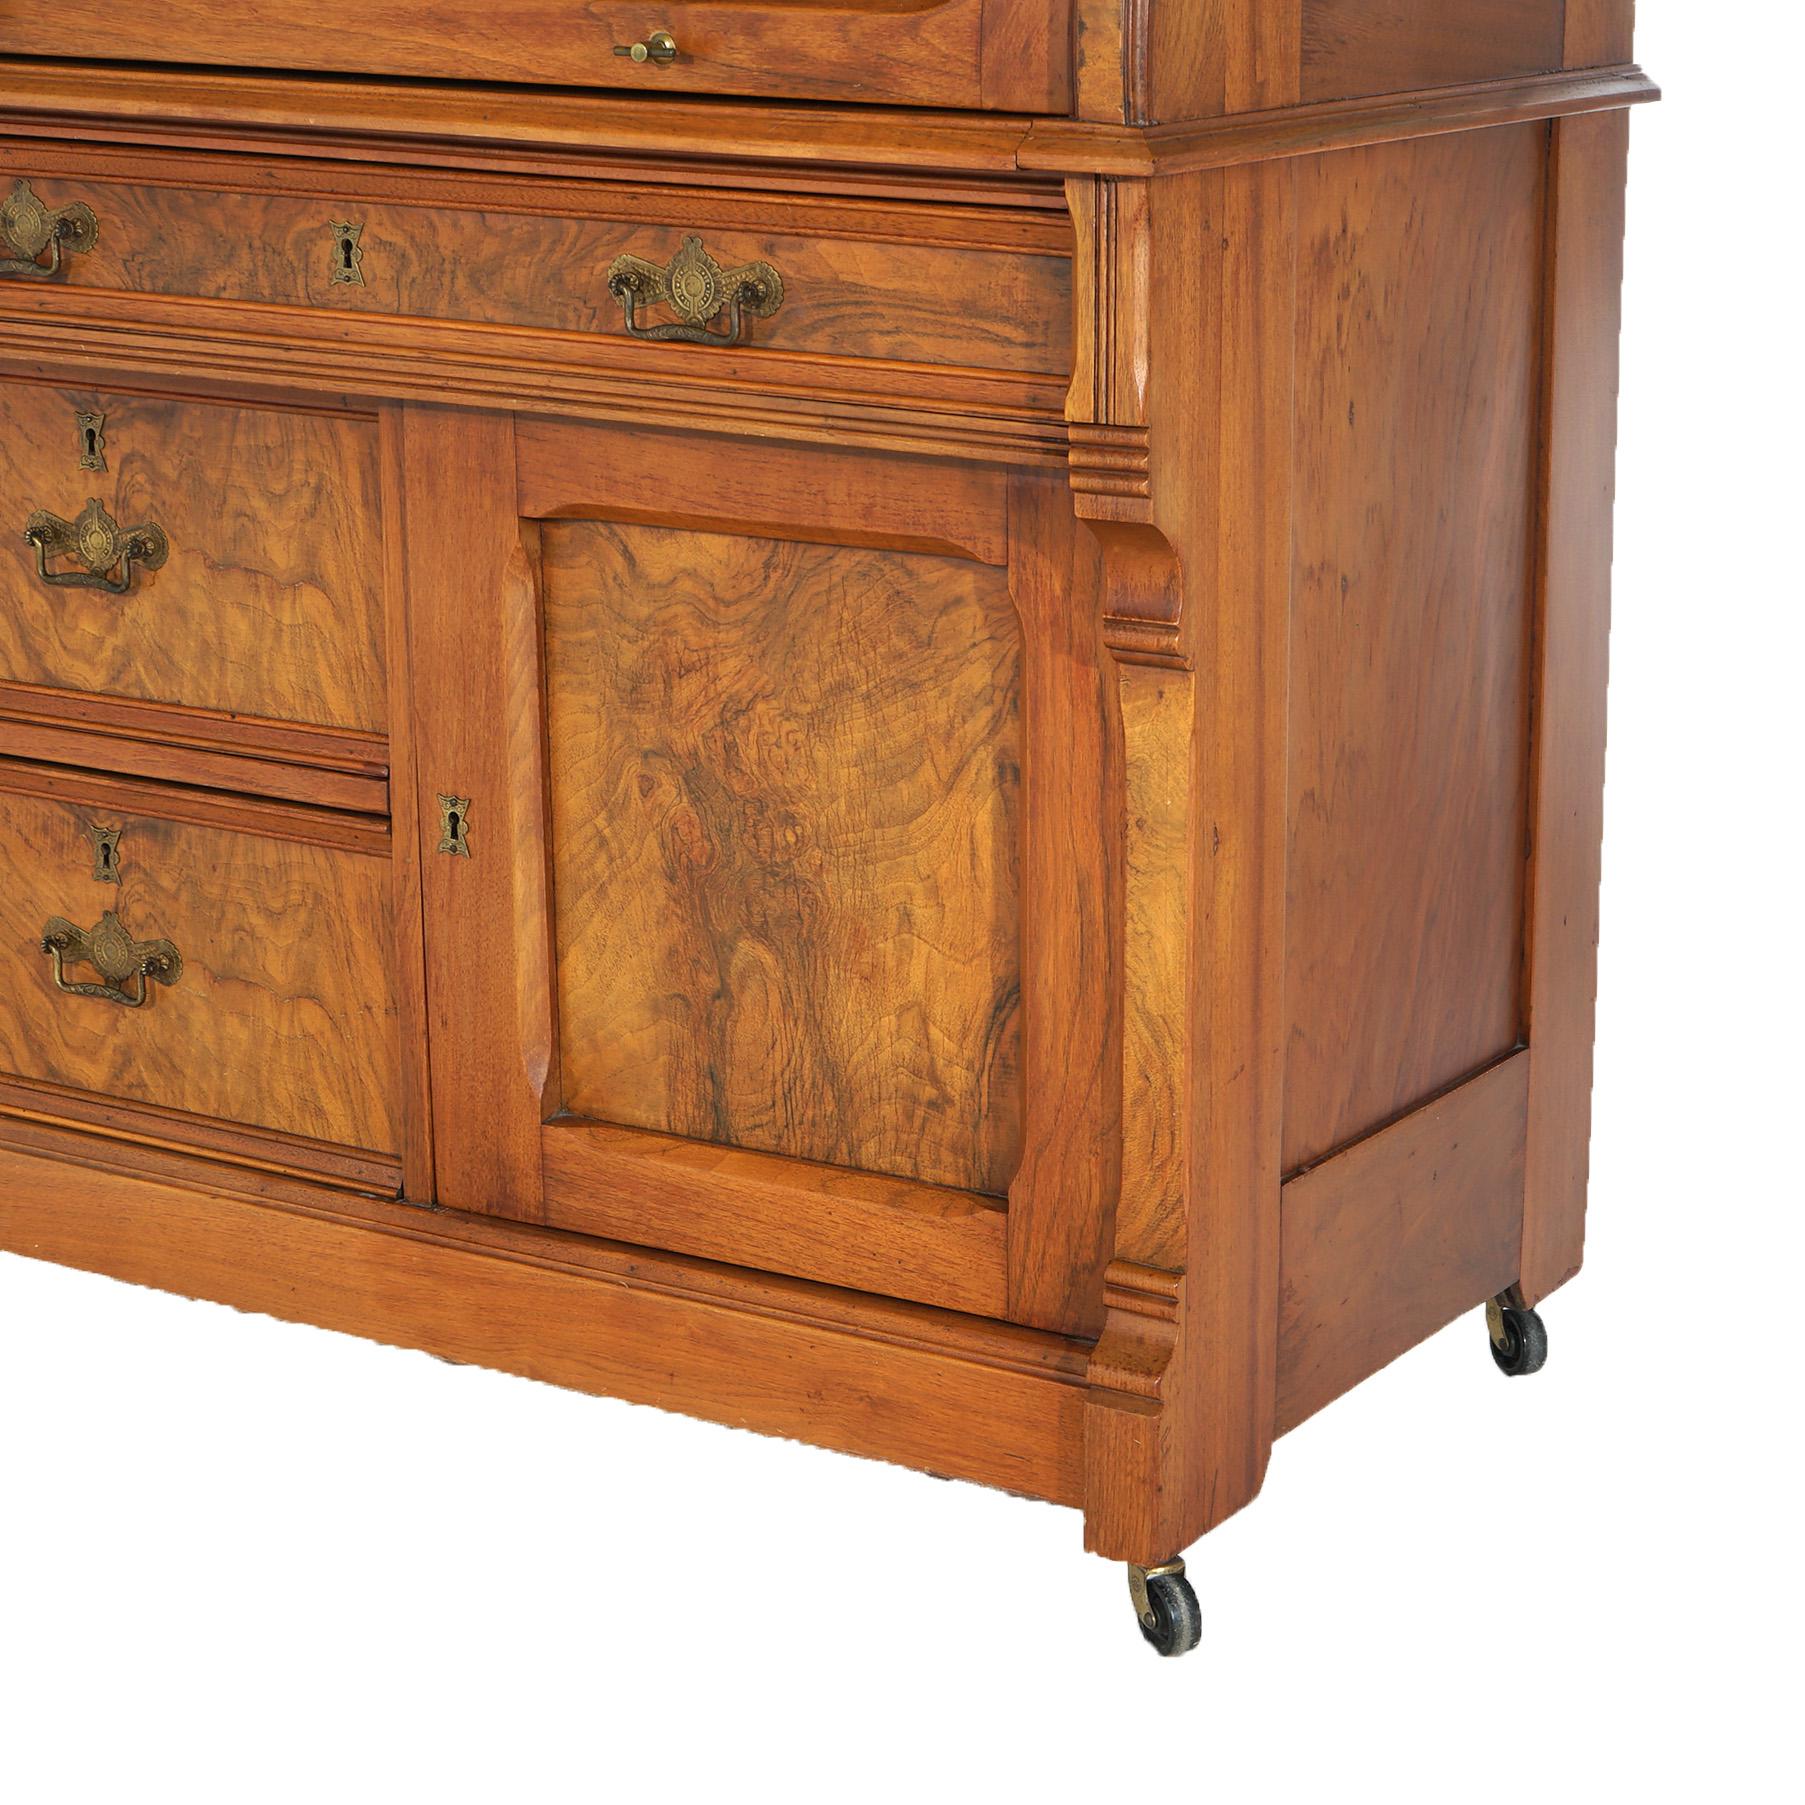 ***Ask About Reduced In-House Delivery Rates - Reliable Professional Service & Fully Insured***
Antique Victorian Walnut & Burl Barrel Roll Top Secretary, Double Glass Door Bookcase & Desk with Drawer Tower & Cabinet , C1890

Measures - 89